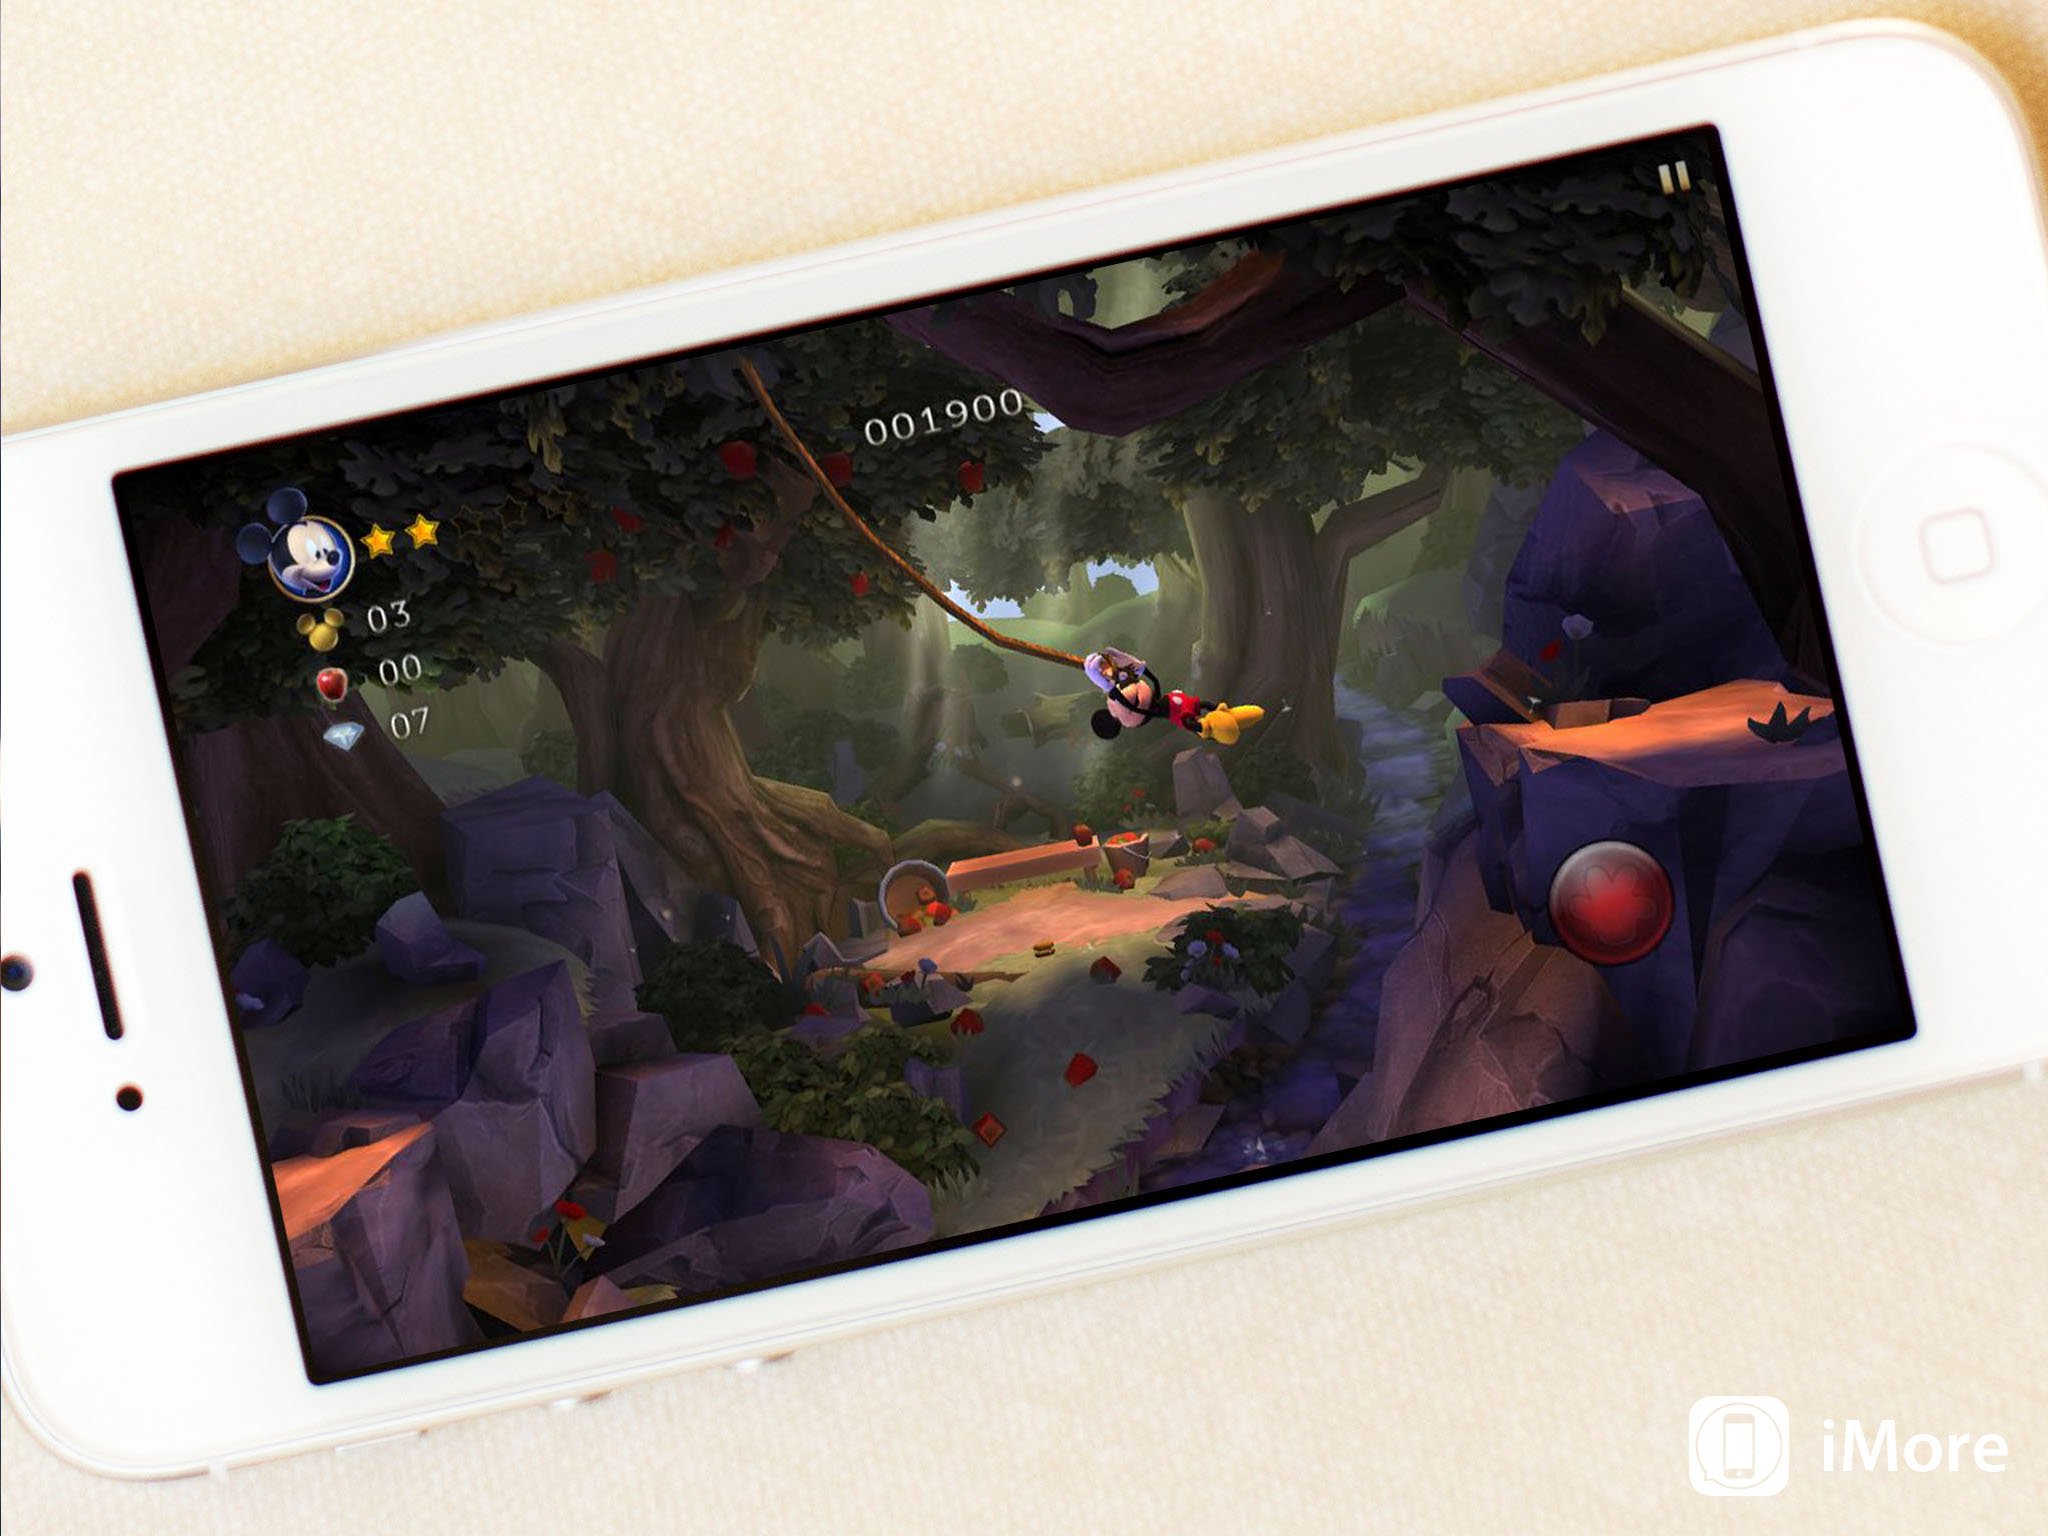 Castle of Illusion Starring Mickey Mouse, now on iOS!